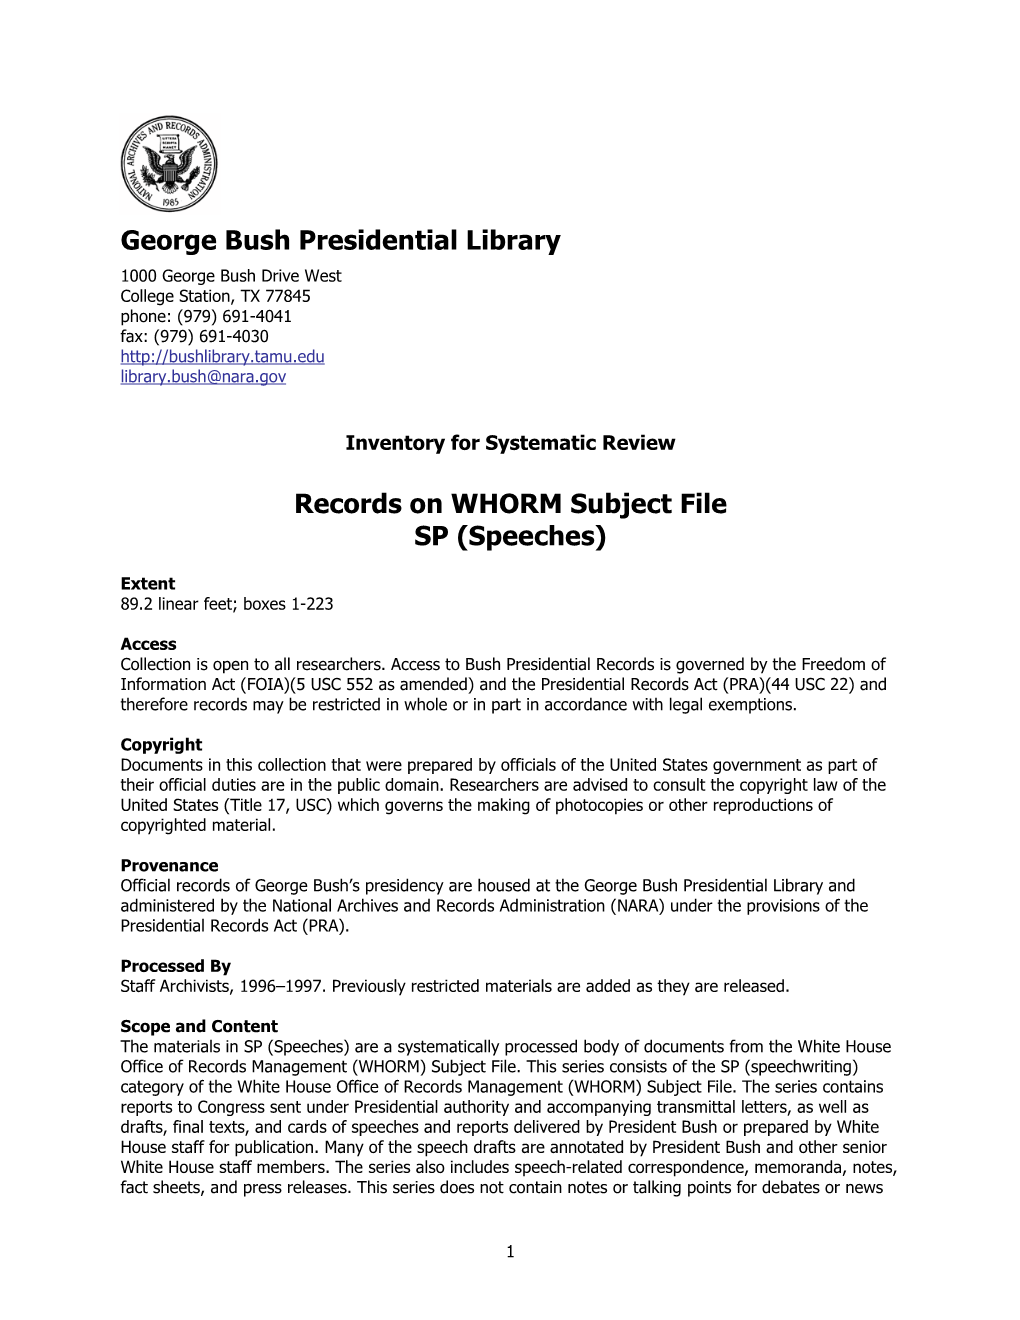 George Bush Presidential Library Records on WHORM Subject File